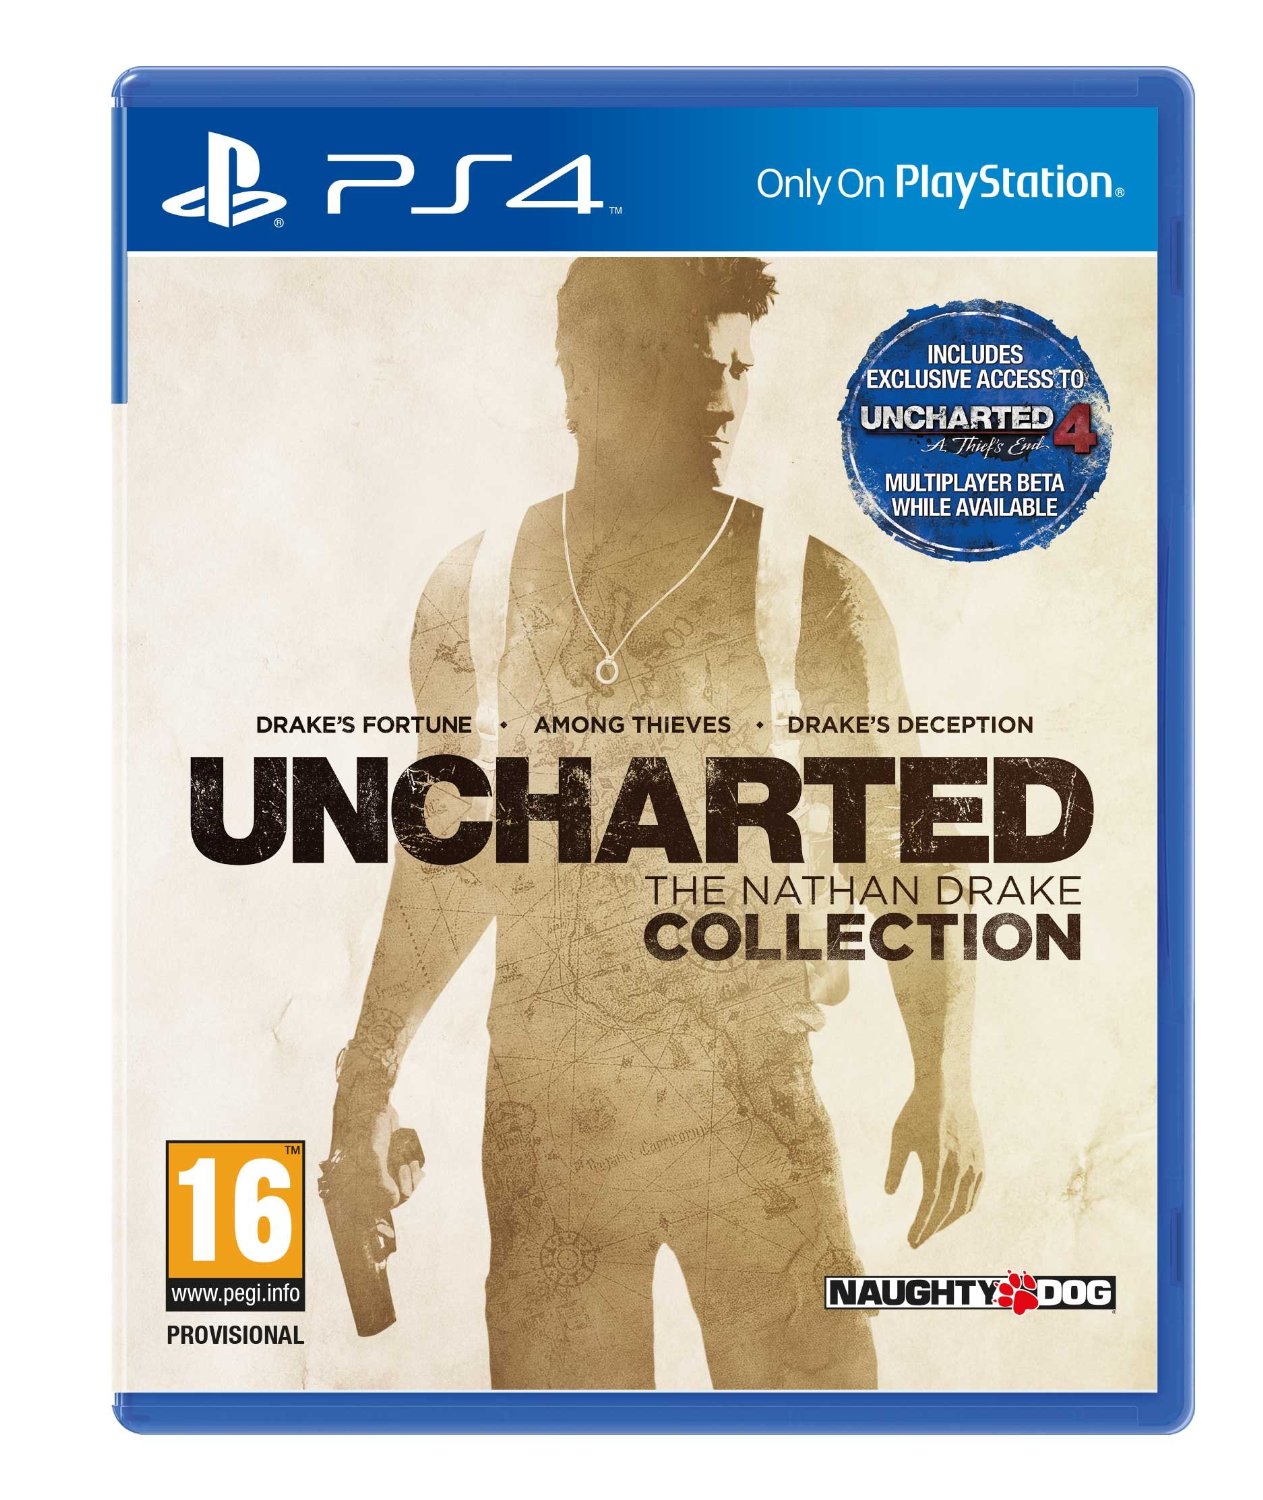 Uncharted: The Nathan Drake Collection Digital Copy CD Key (Playstation 4): Europe - 